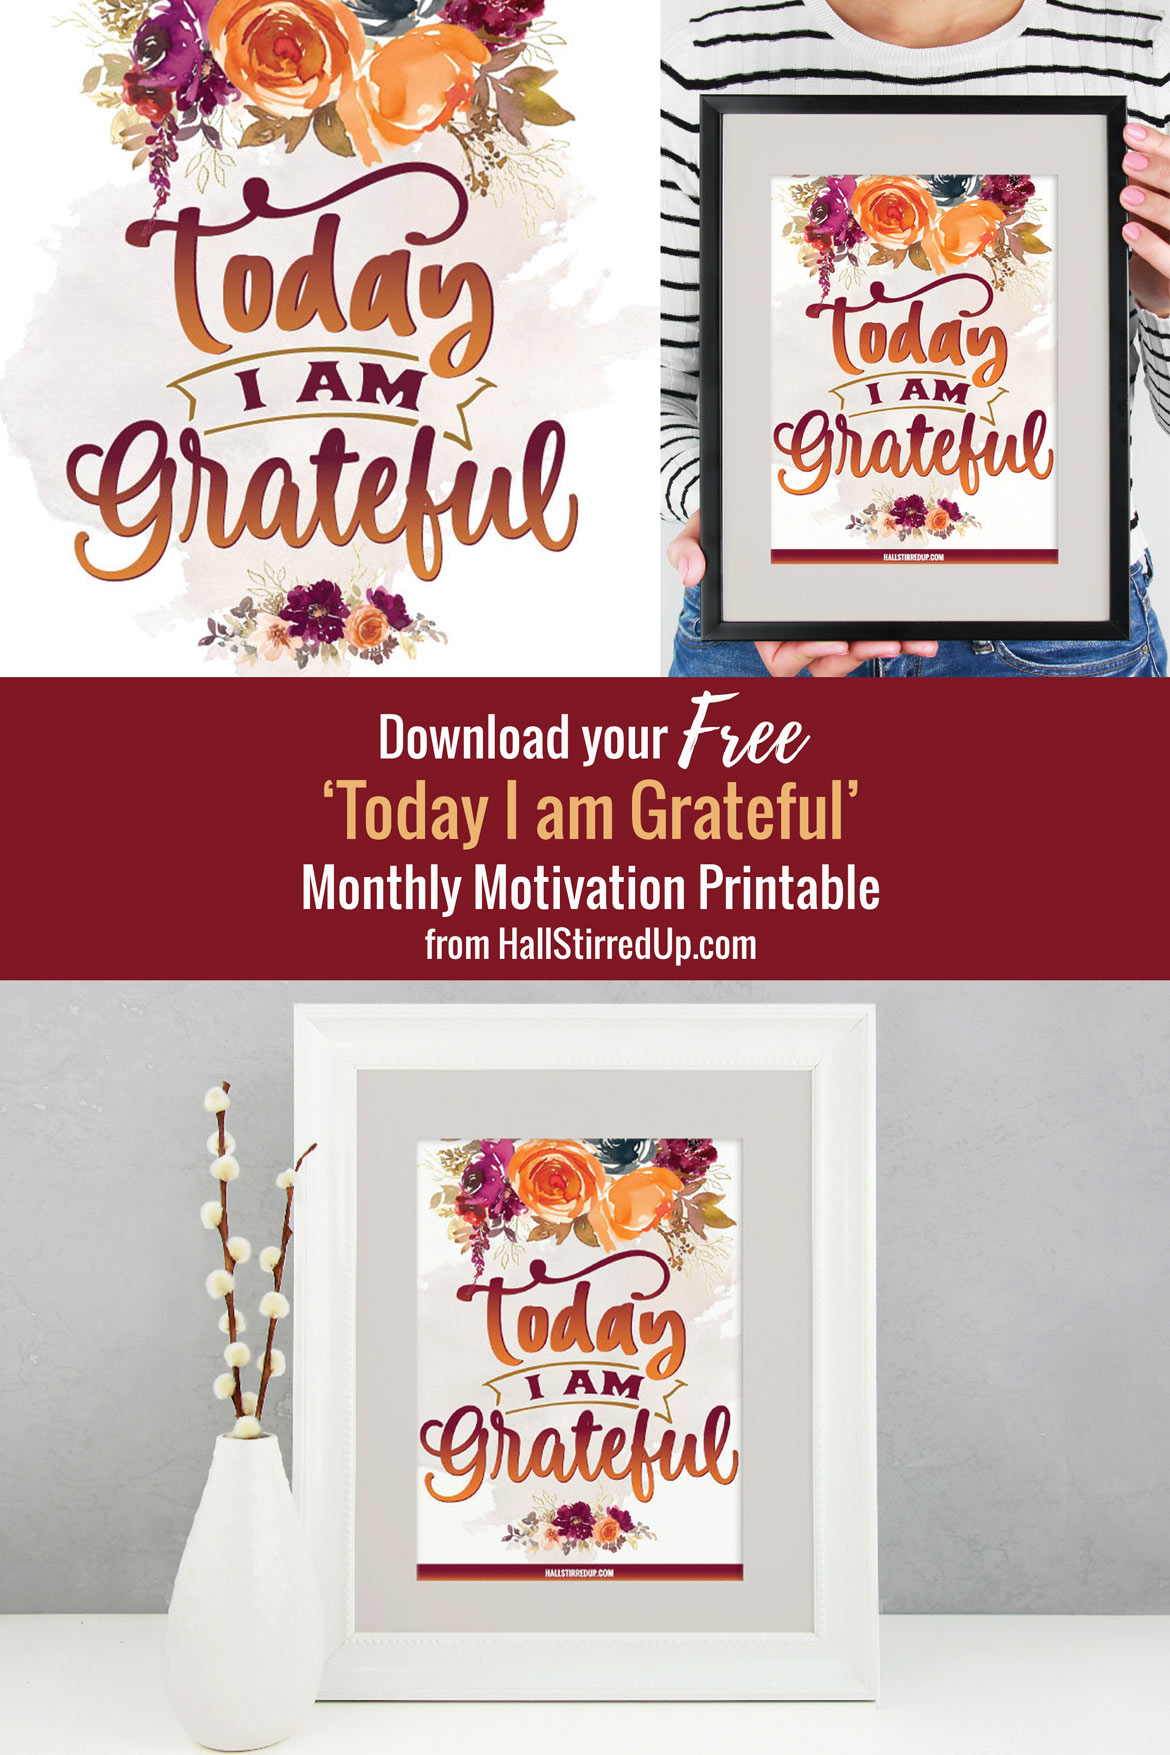 Today I am grateful Monthly Motivation and free printable